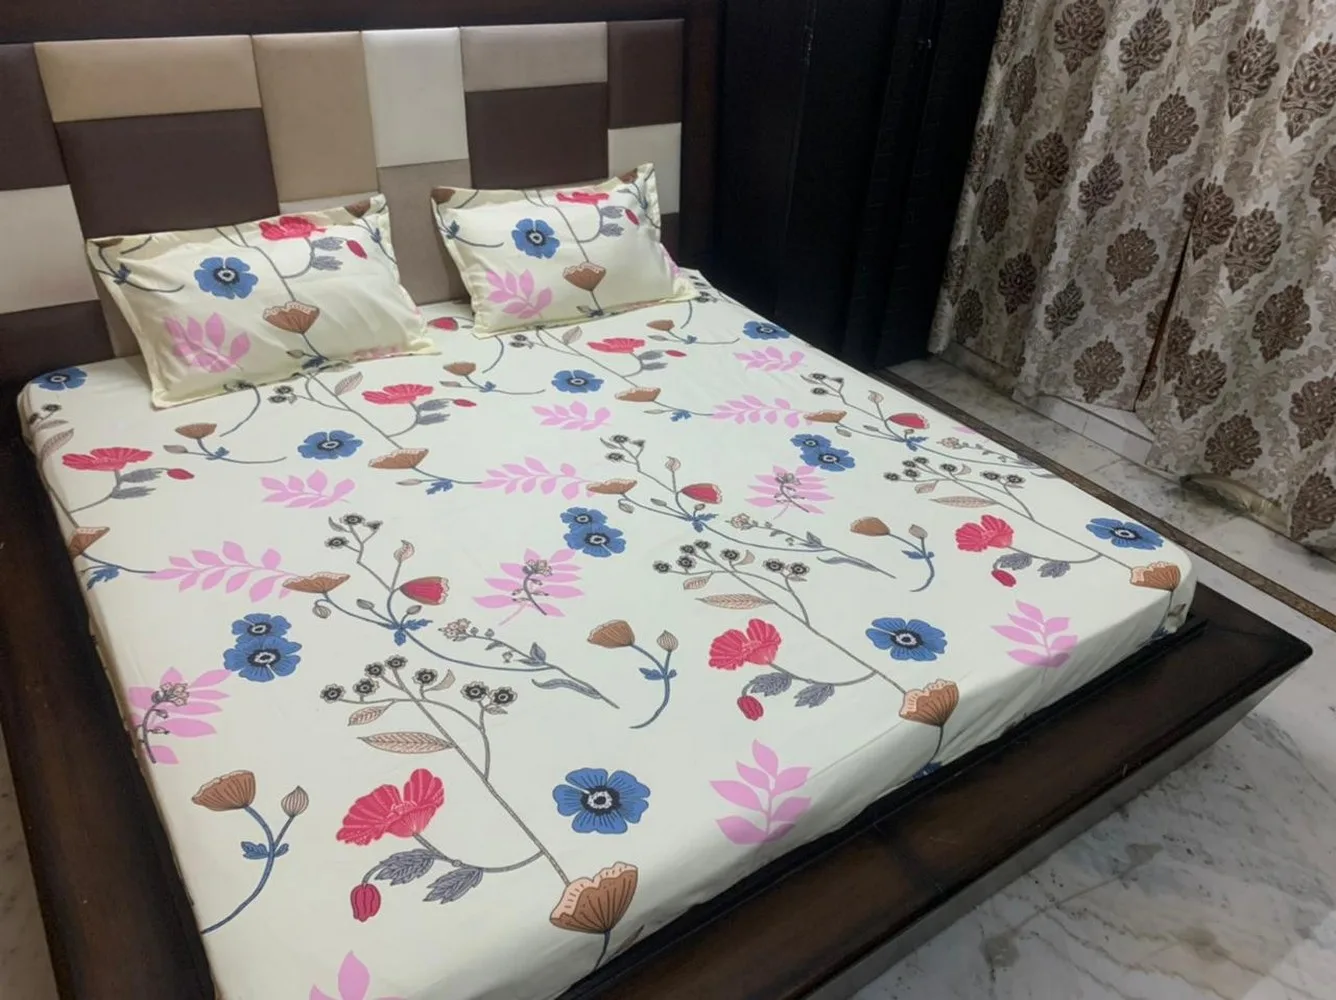 Bedsheet printed, Fitted, Elastic Corner, 90x100, Glace Cotton, 2 Pillow Covers, white floral design